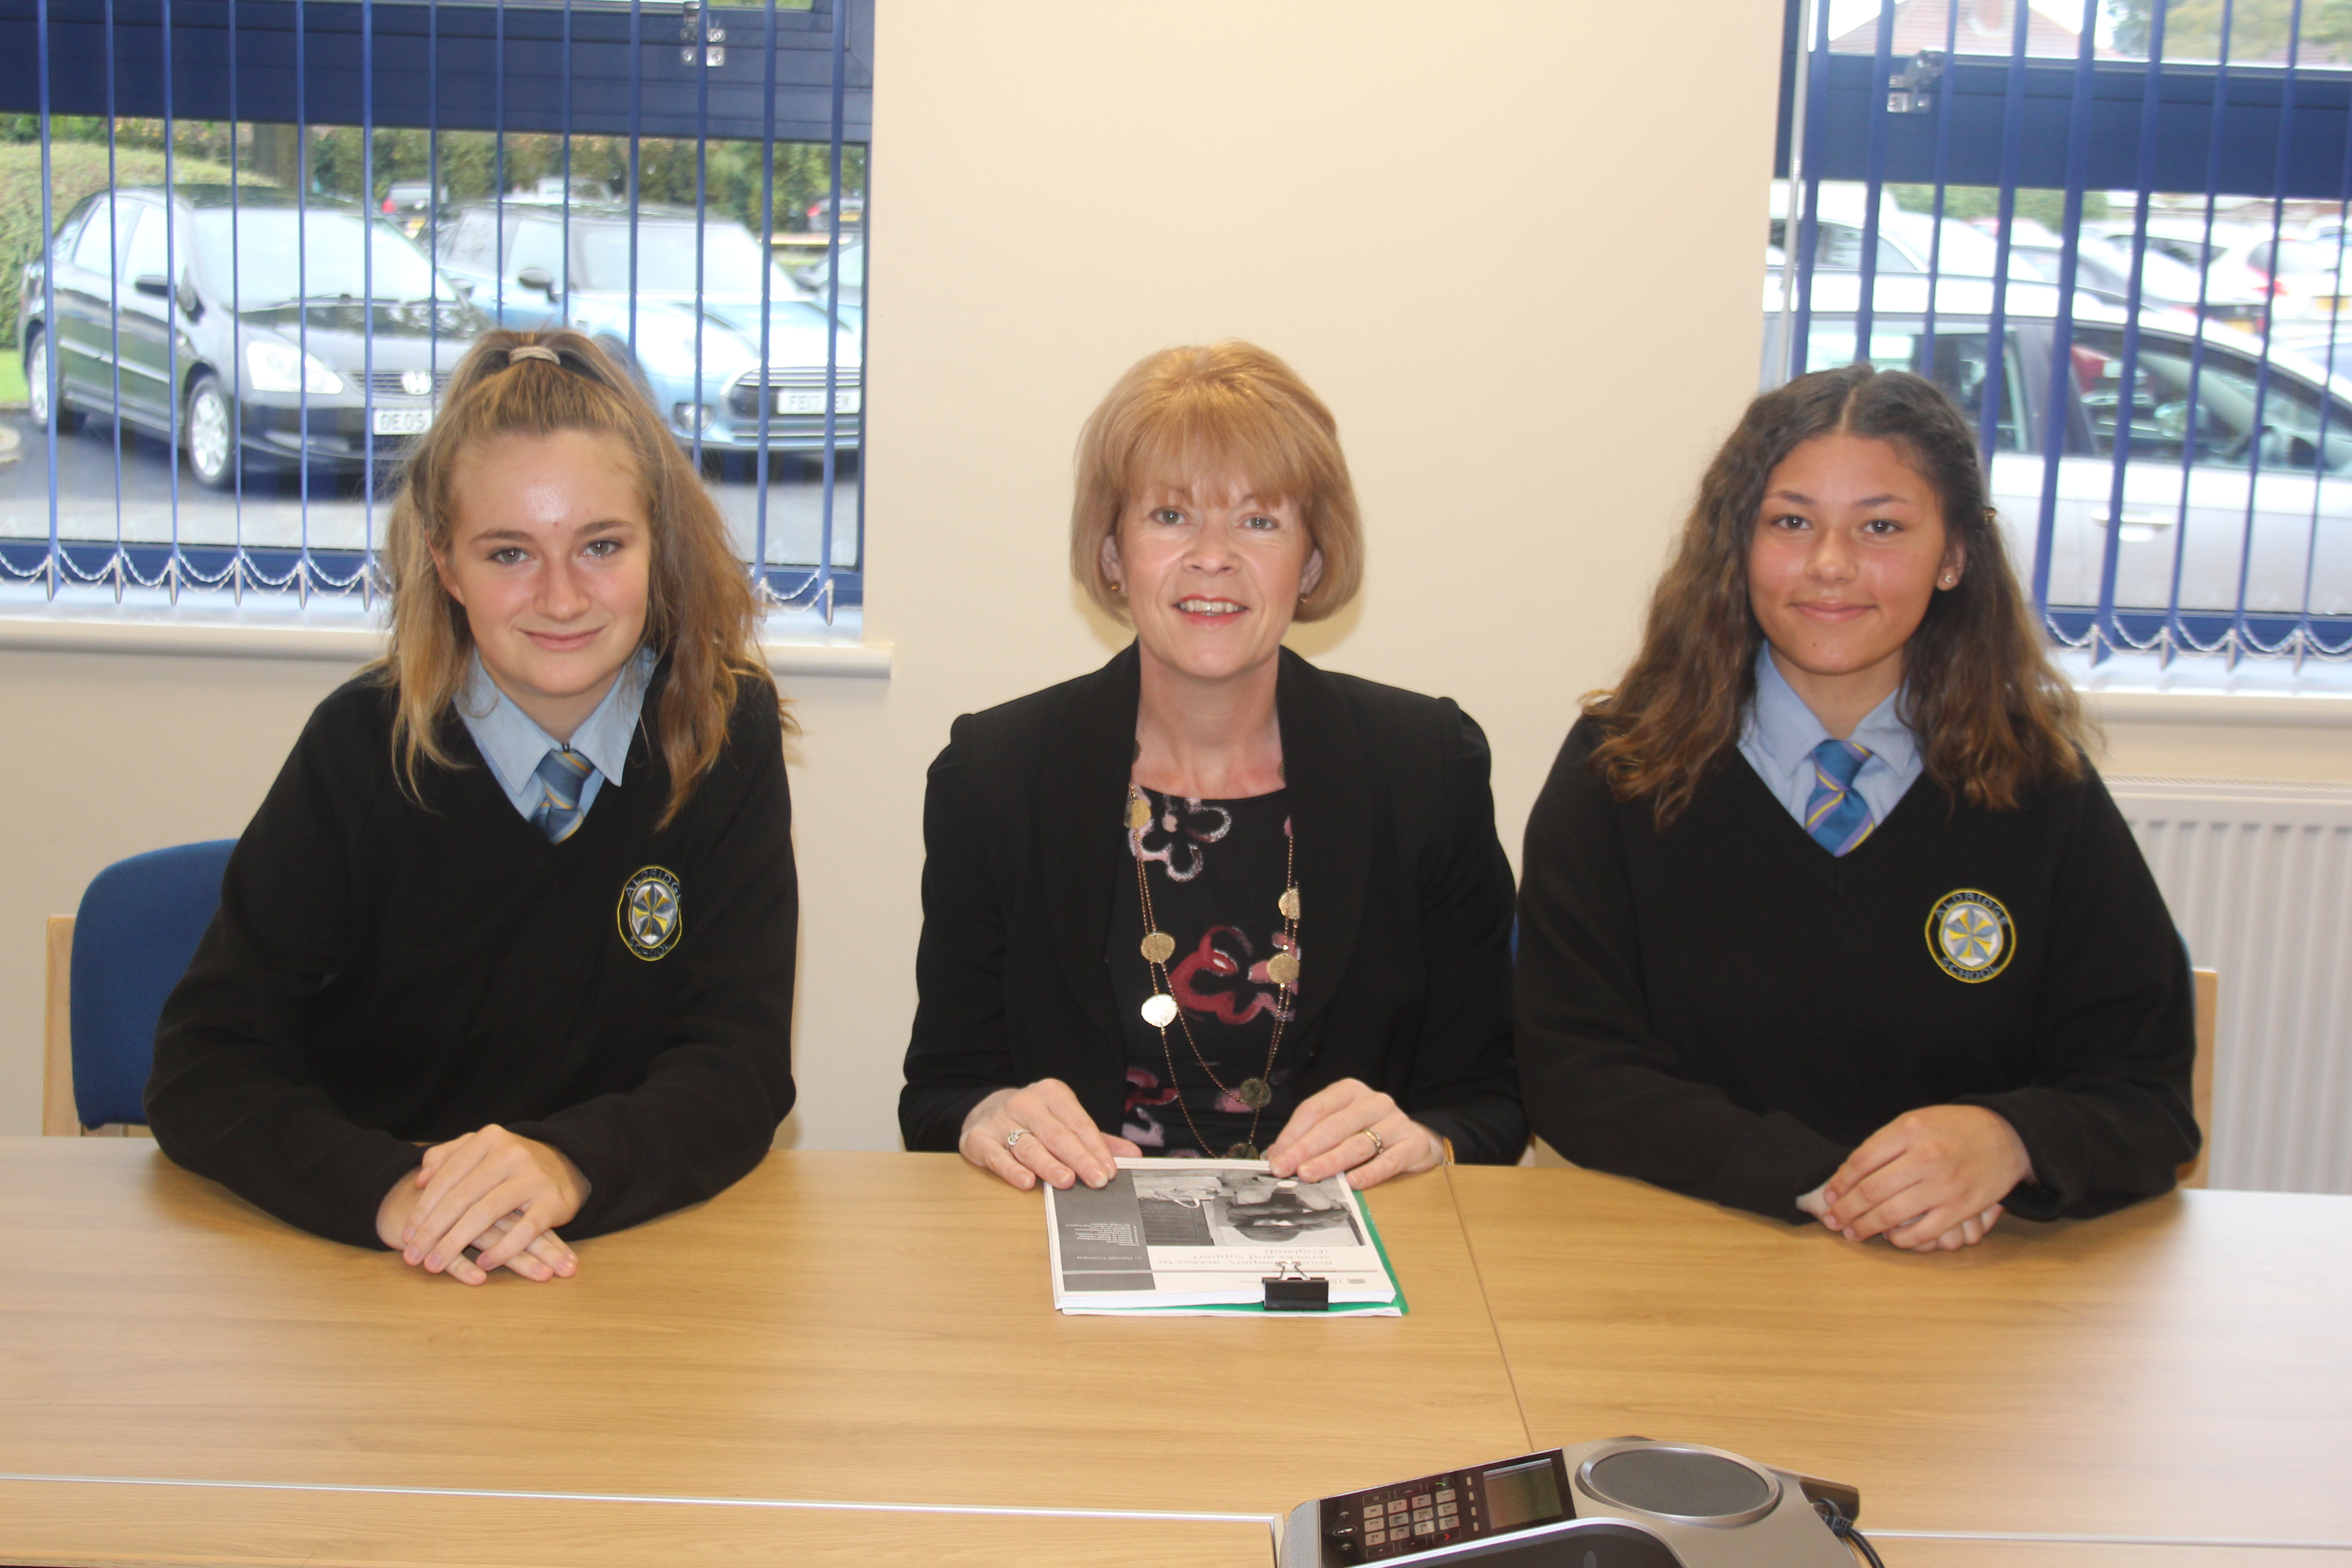 Discussion and interview with Citizenship Students at Aldridge School